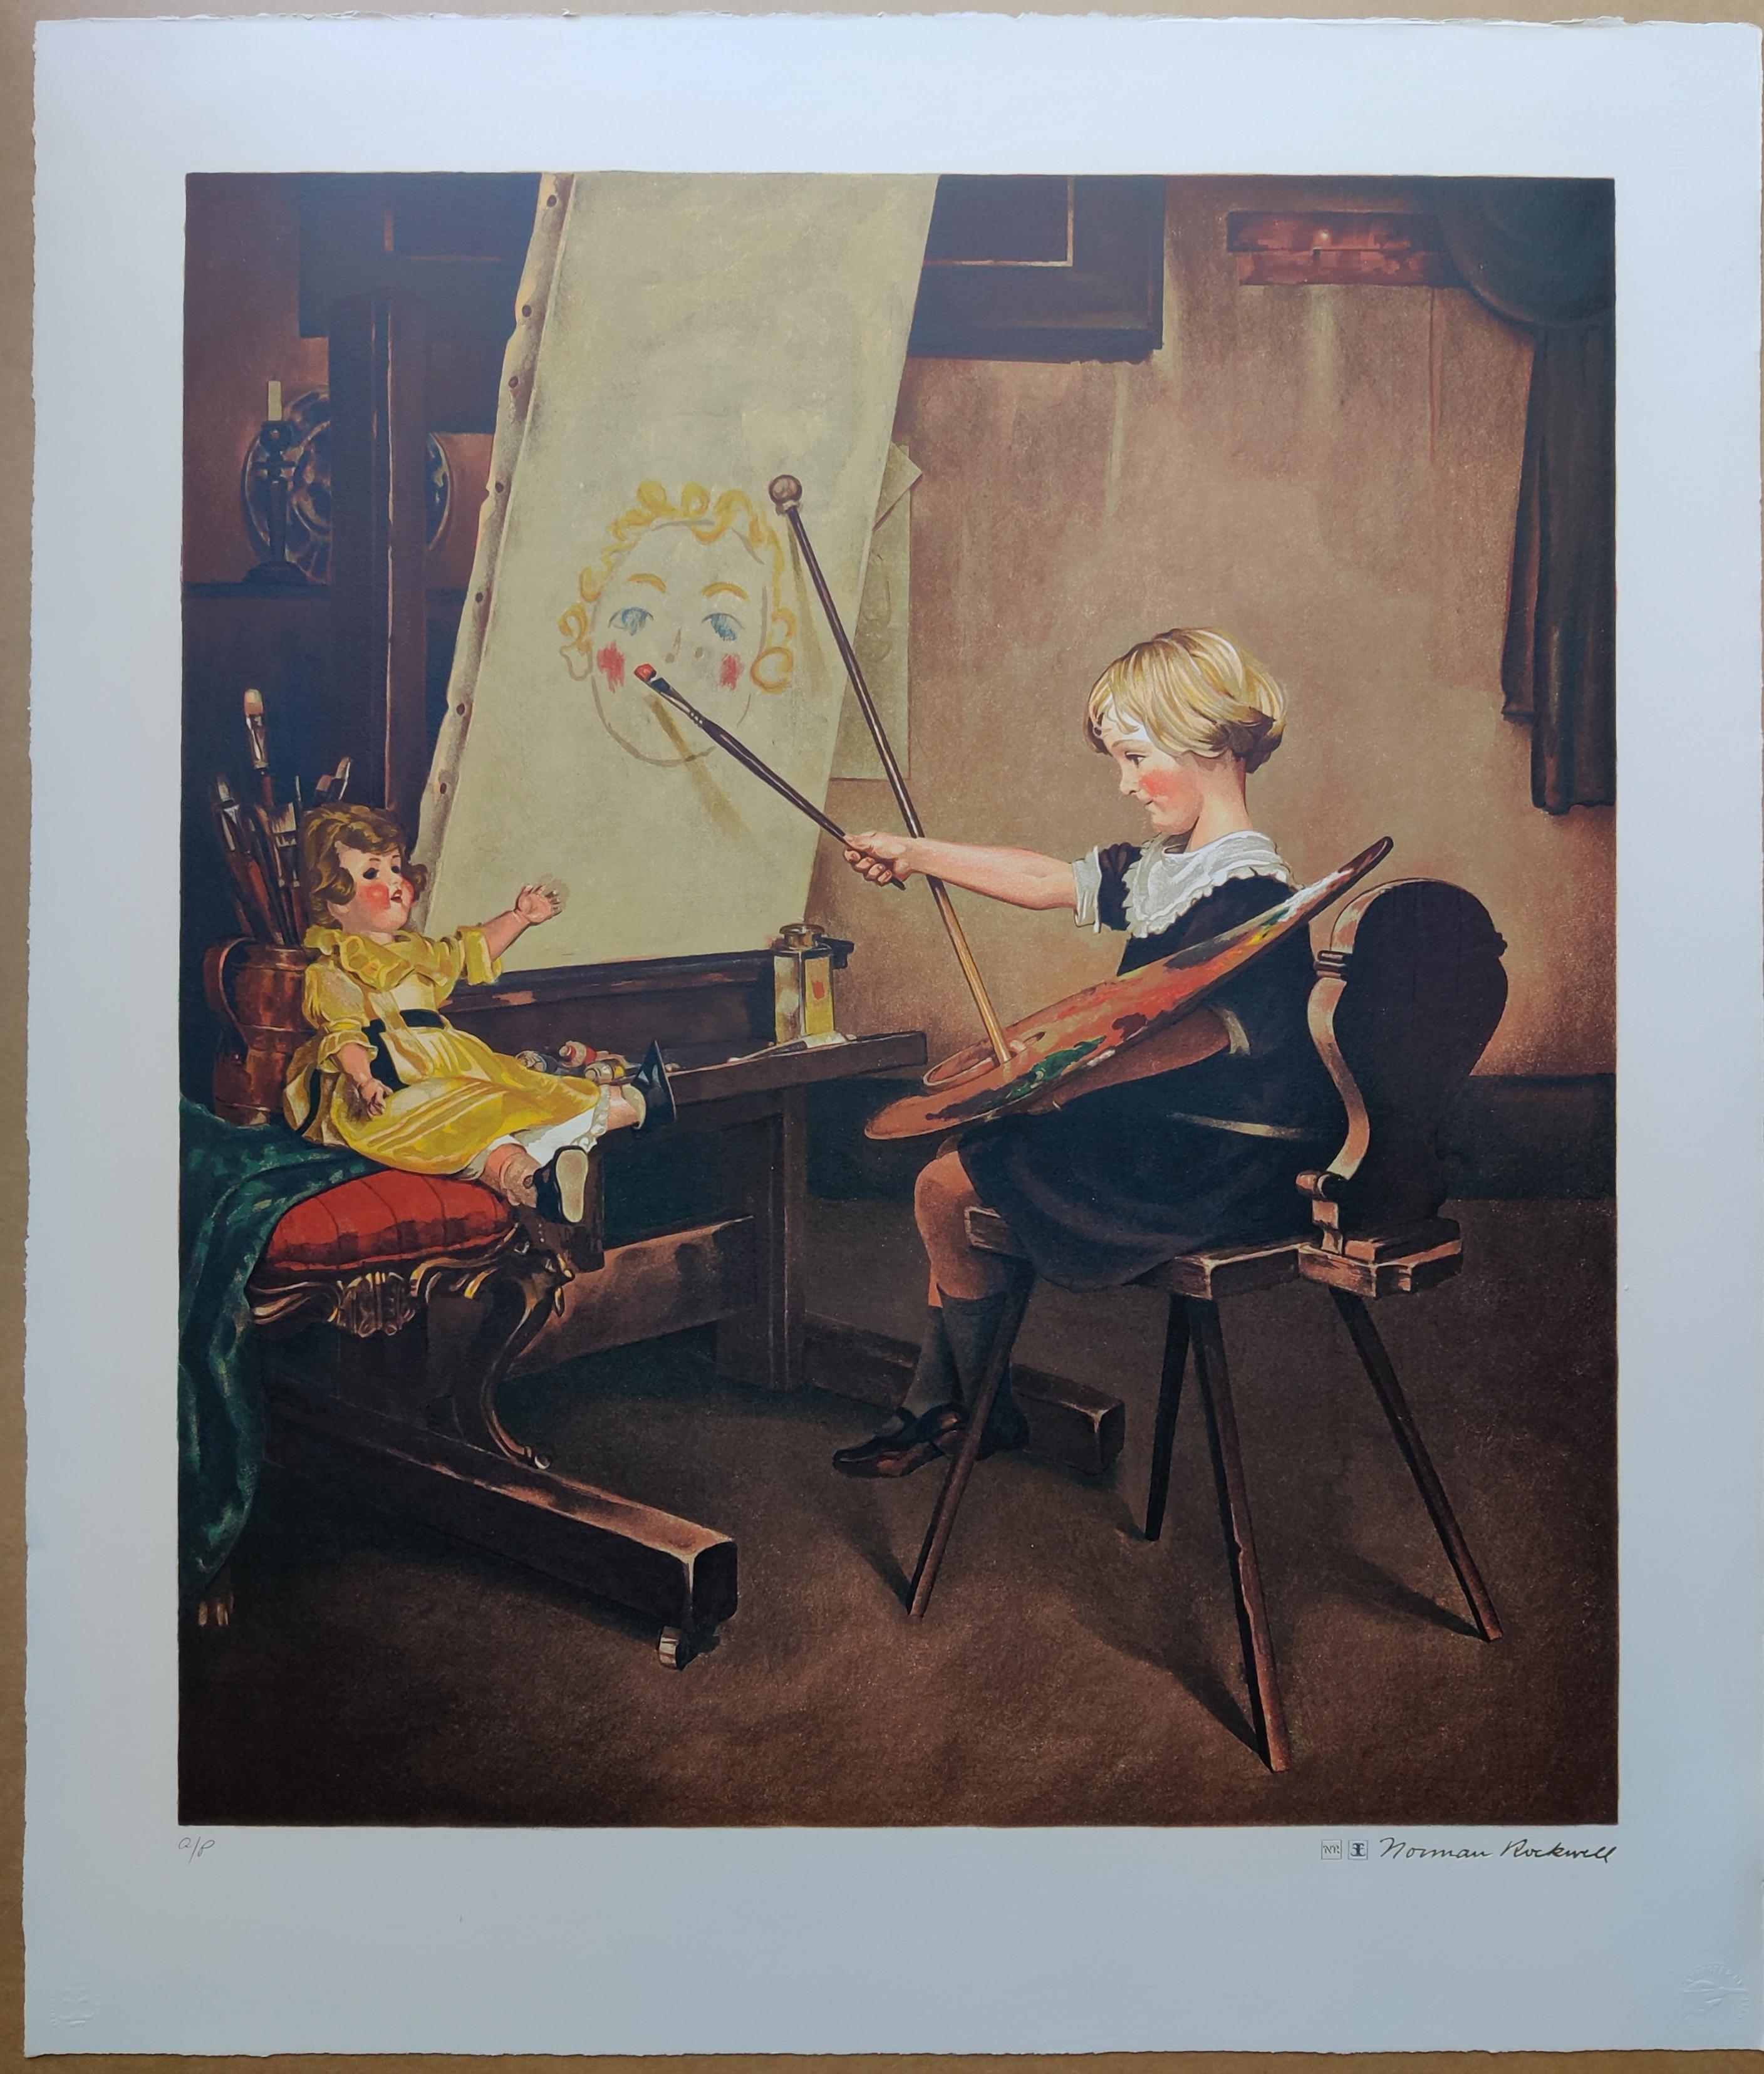 Norman Rockwell
Artist's Daughter
Encore Edition prints, approved by Norman Rockwell
Numbered AP lower left with blindstamp. 
Gold embossed signature lower right
Image size: 68.5 x 59.5 cm
Sheet size: 84.5 x 72.5 cm
Printed by Atelier Ettinger